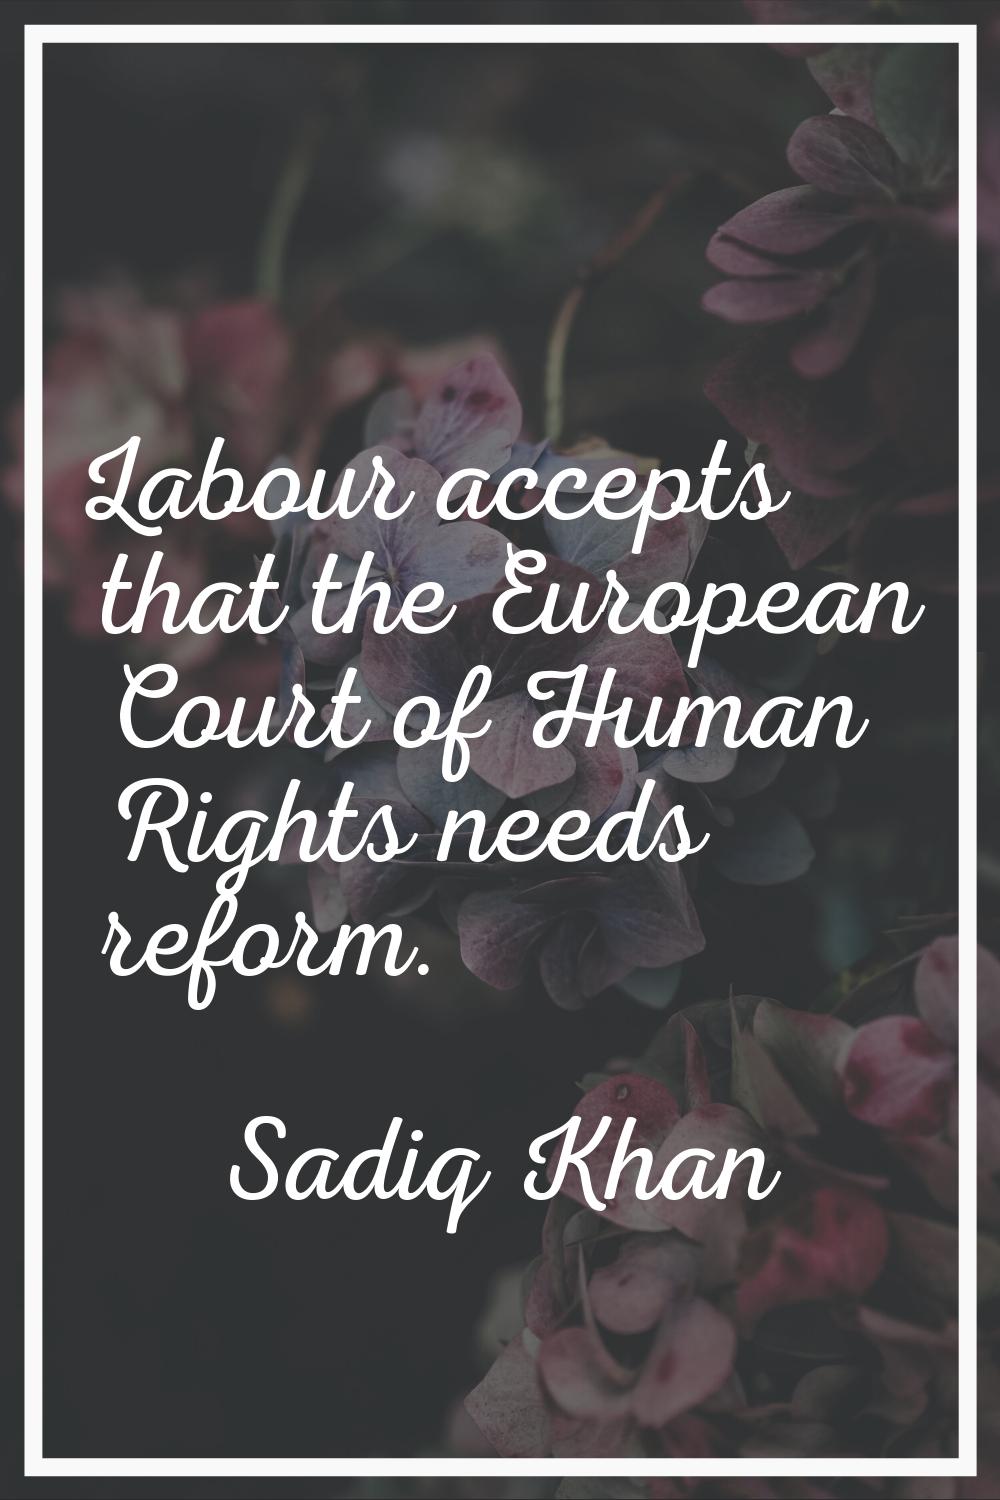 Labour accepts that the European Court of Human Rights needs reform.